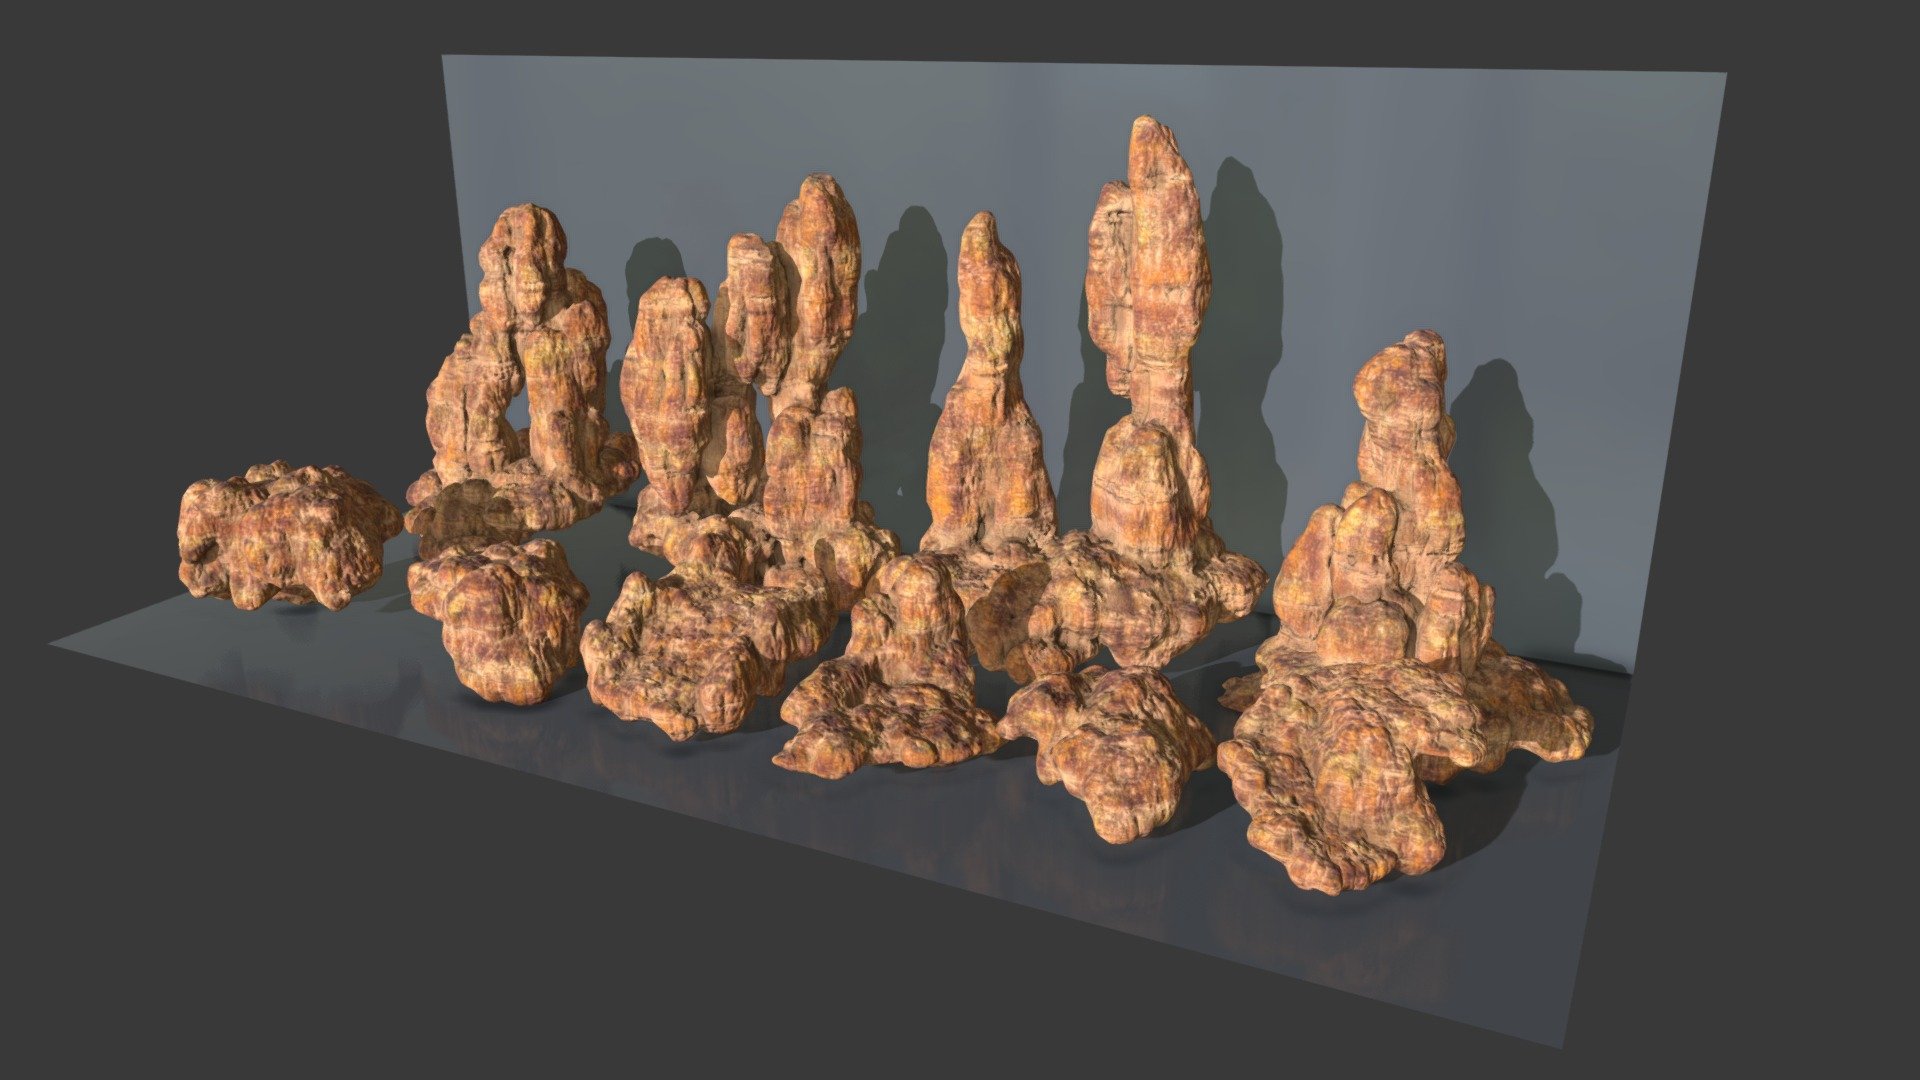 Package Overview:

There are 10 shapes in this package

1/Poly count:

Cave desert rock 01: 5000 polys. Cave desert rock 02: 5000 polys. Cave desert rock 03: 5000 polys. Cave desert rock 04: 5000 polys. Cave desert rock 05: 5000 polys. Cave desert rock 06: 15000 polys. Cave desert rock 07: 5000 polys. Cave desert rock 08: 20000 polys. Cave desert rock 09: 20000 polys. Cave desert rock 10: 15000 polys.

2/Texture:

4096x4096 (Color, Normal, Roughness, Ambient Occlusion)

3/Format:

3dsmax, Fbx, Obj

4/Product Features:

High-quality textures, including basic channels, are suitable for all projects (movies or games) and any software or render engines.

Very pleased if my product is useful for your work!

Thank you for your interest!

cave cliff exterior damaged landscape mountain mountains nature rock rocks desert stone stones cavern granite canyon damage - Low poly Desert Cave Modular Pack B 200828 - Buy Royalty Free 3D model by Mega 3D (@3dlandscape) 3d model